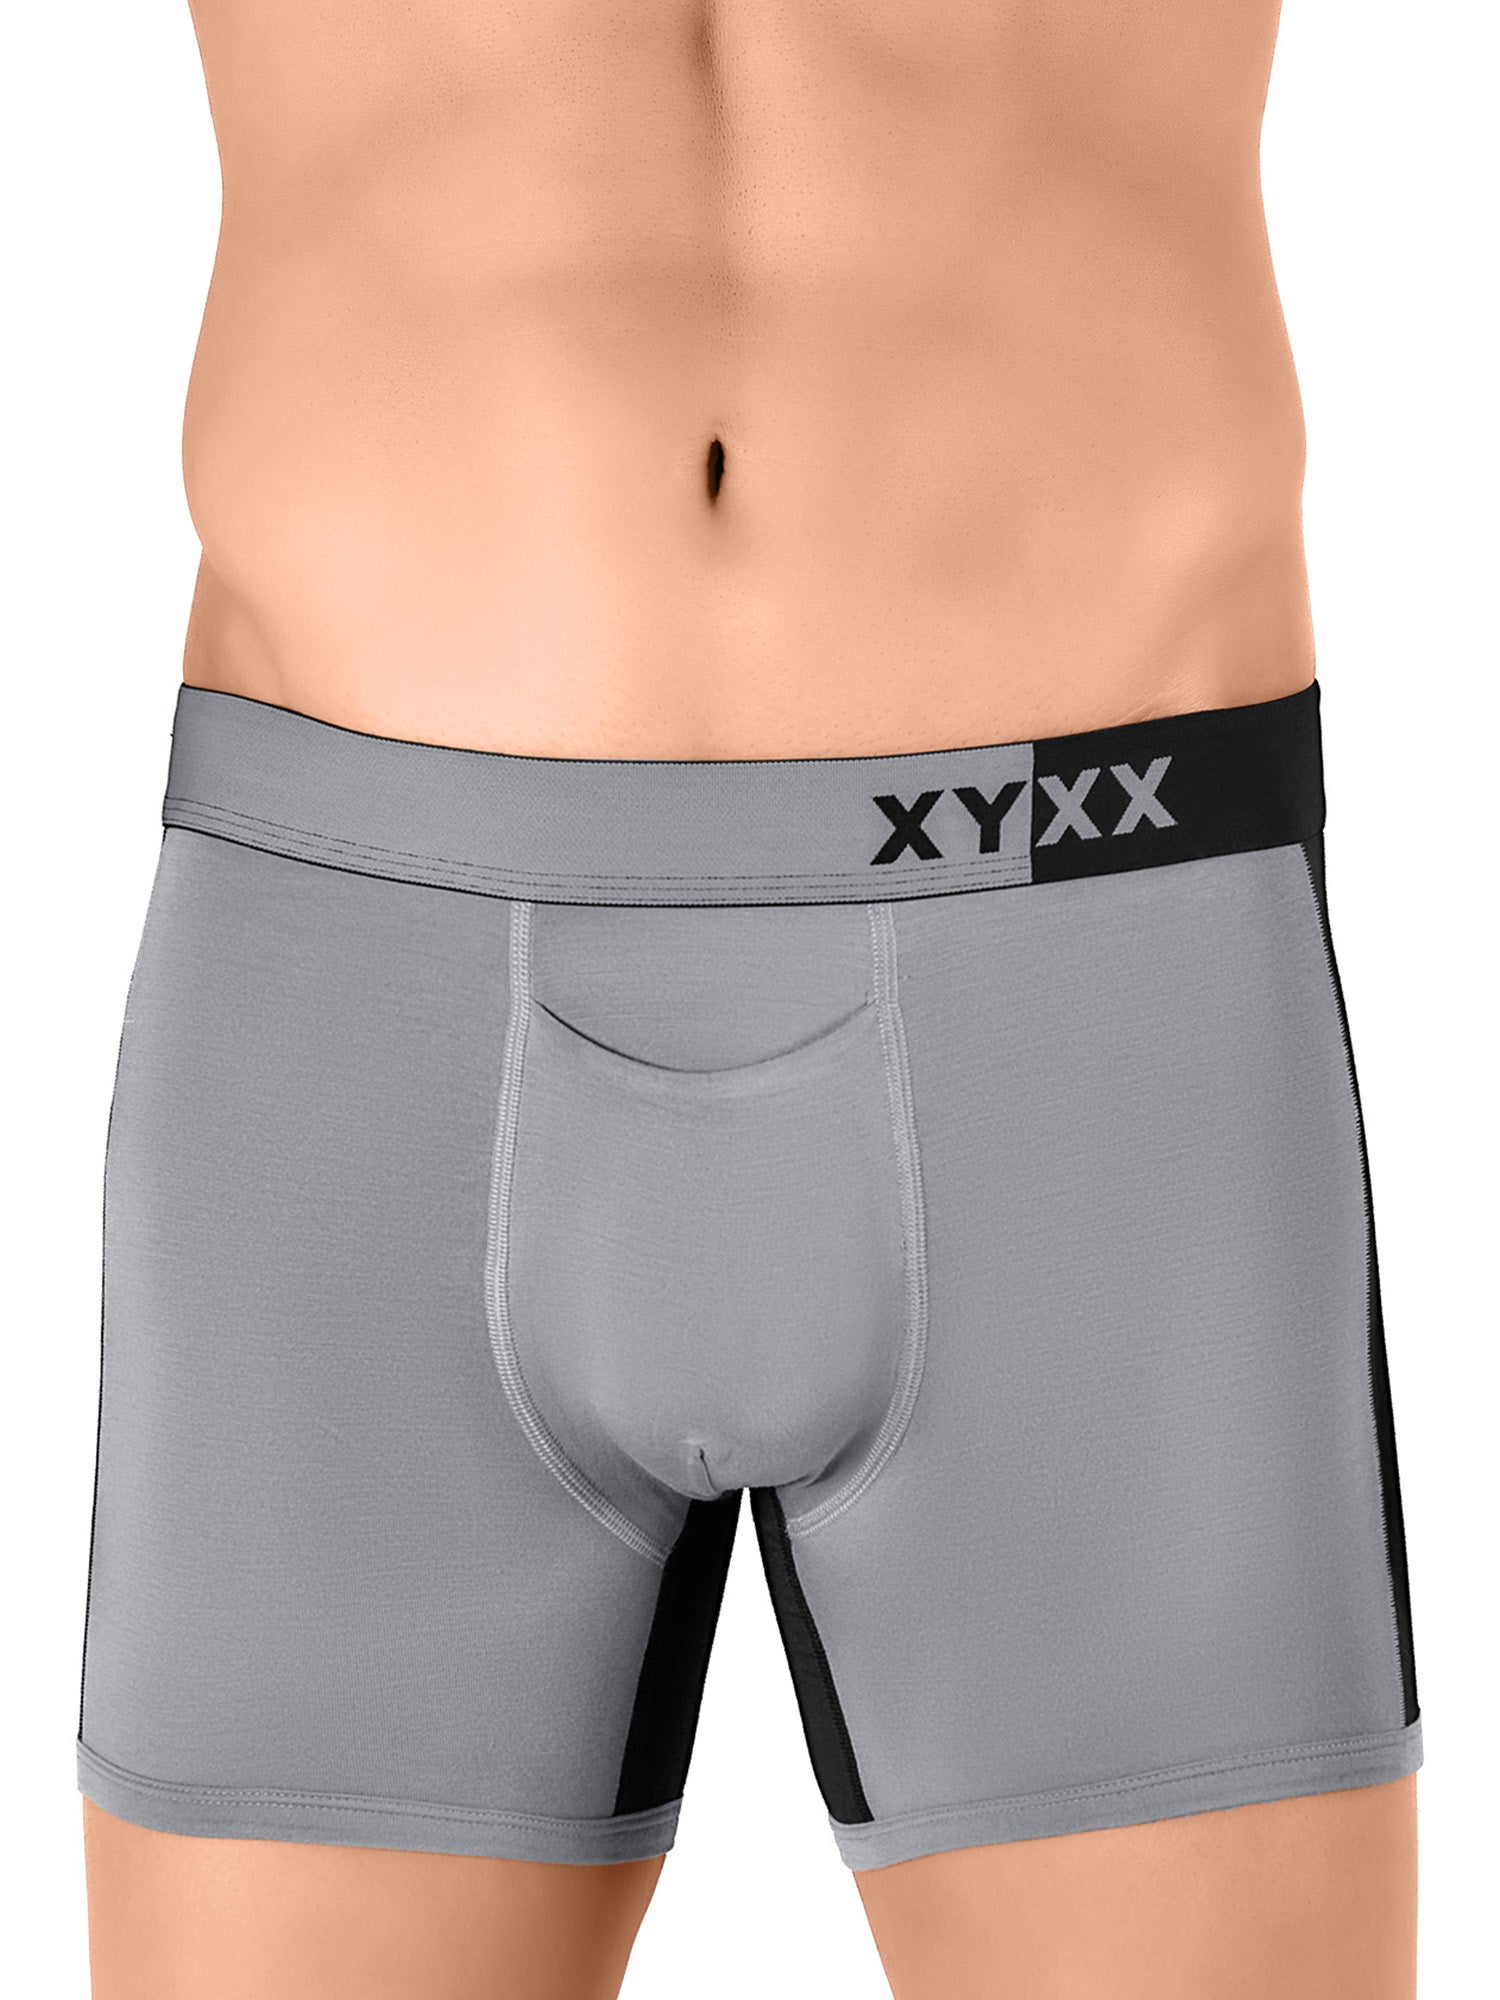 Dualist Modal Trunks For Men Pack of 3 -  XYXX Mens Apparels